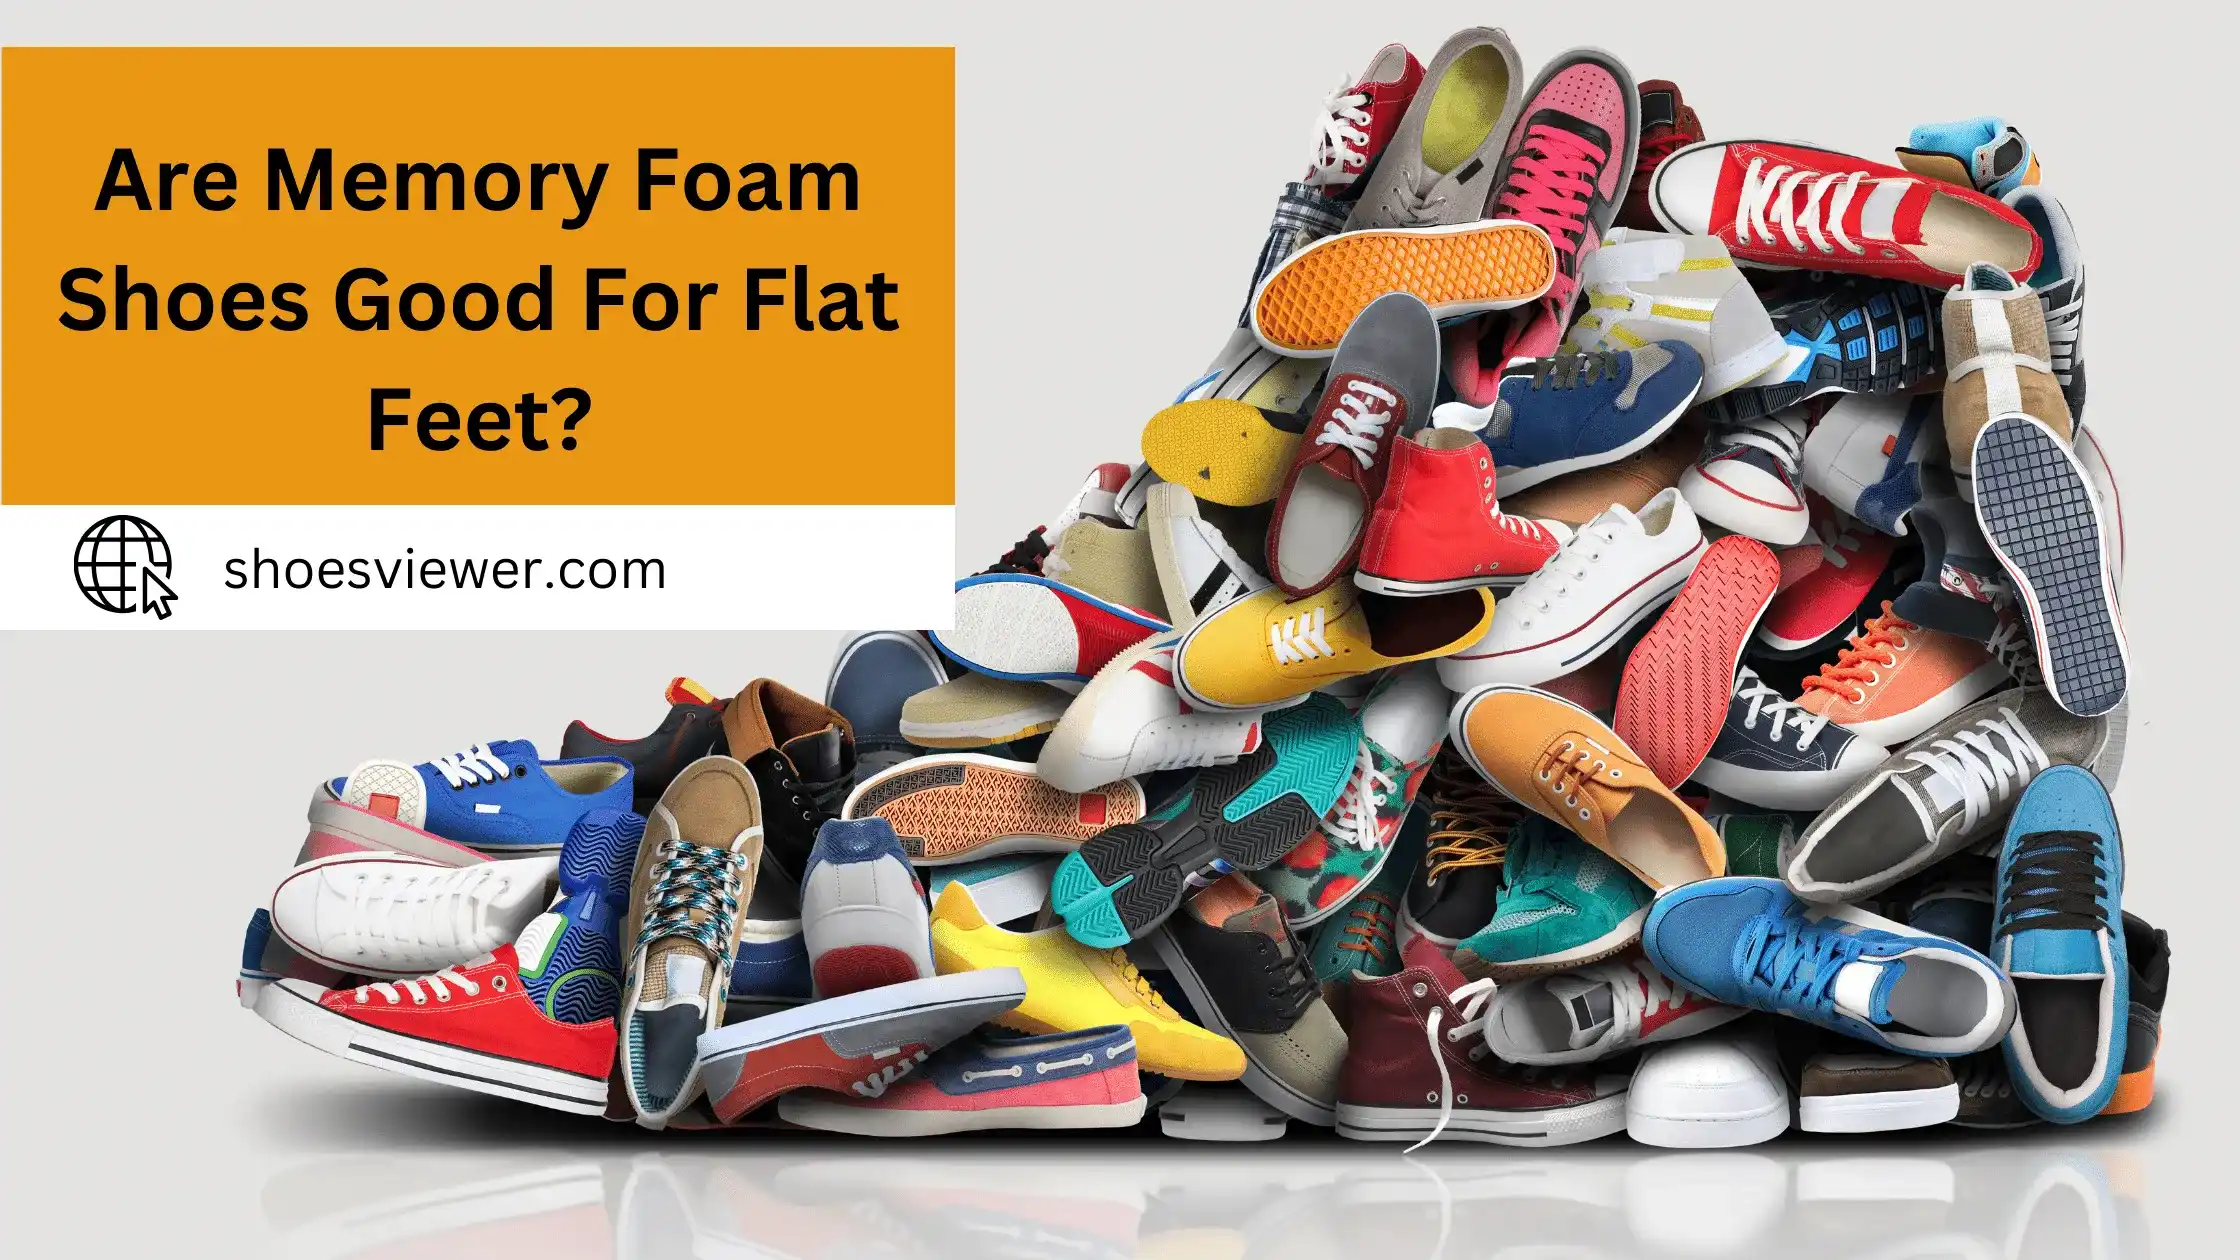 Are Memory Foam Shoes Good For Flat Feet?